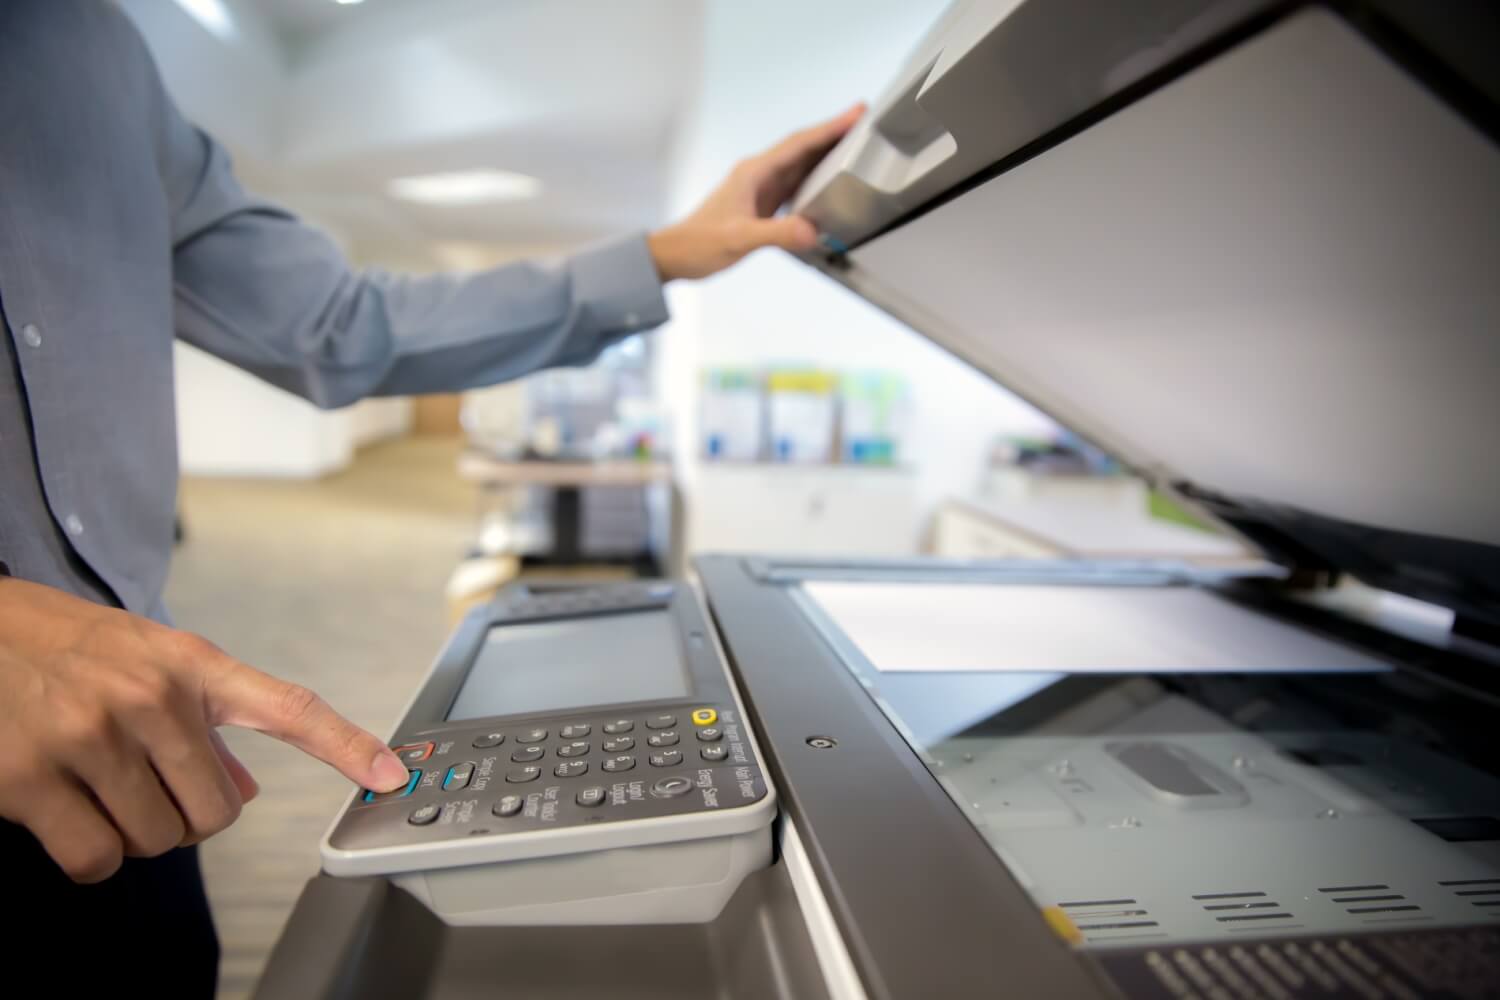 How Long Are Copier Rentals in Oklahoma?